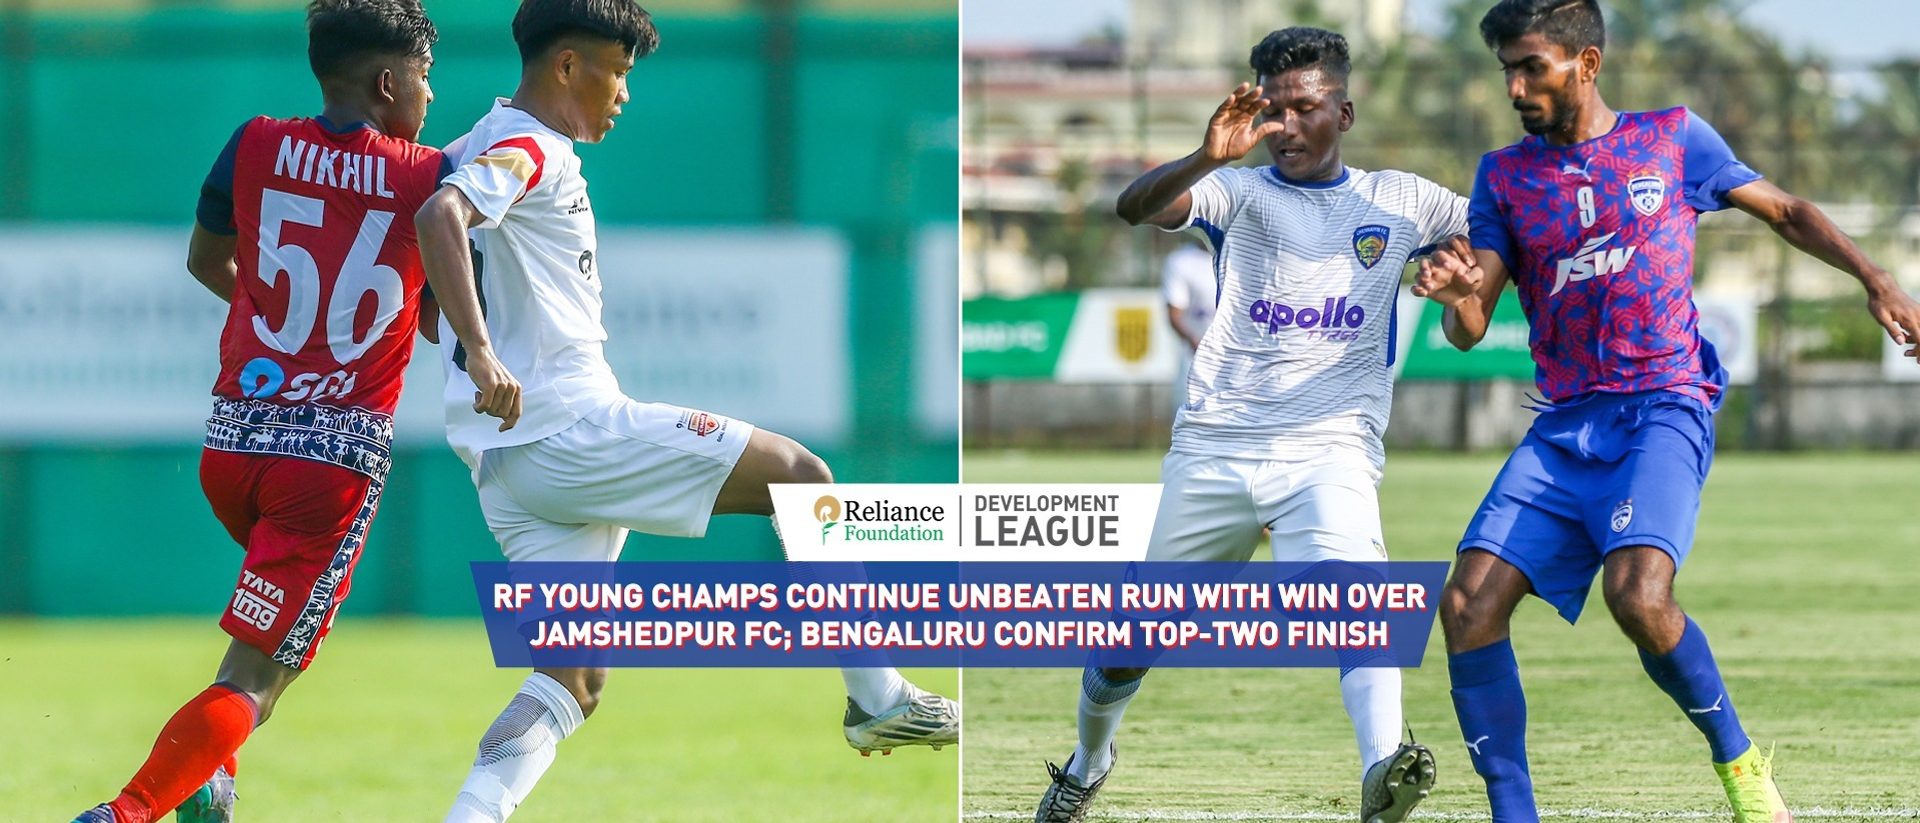 RF Young Champs continue unbeaten run with win over Jamshedpur FC; Bengaluru confirm top-two finish